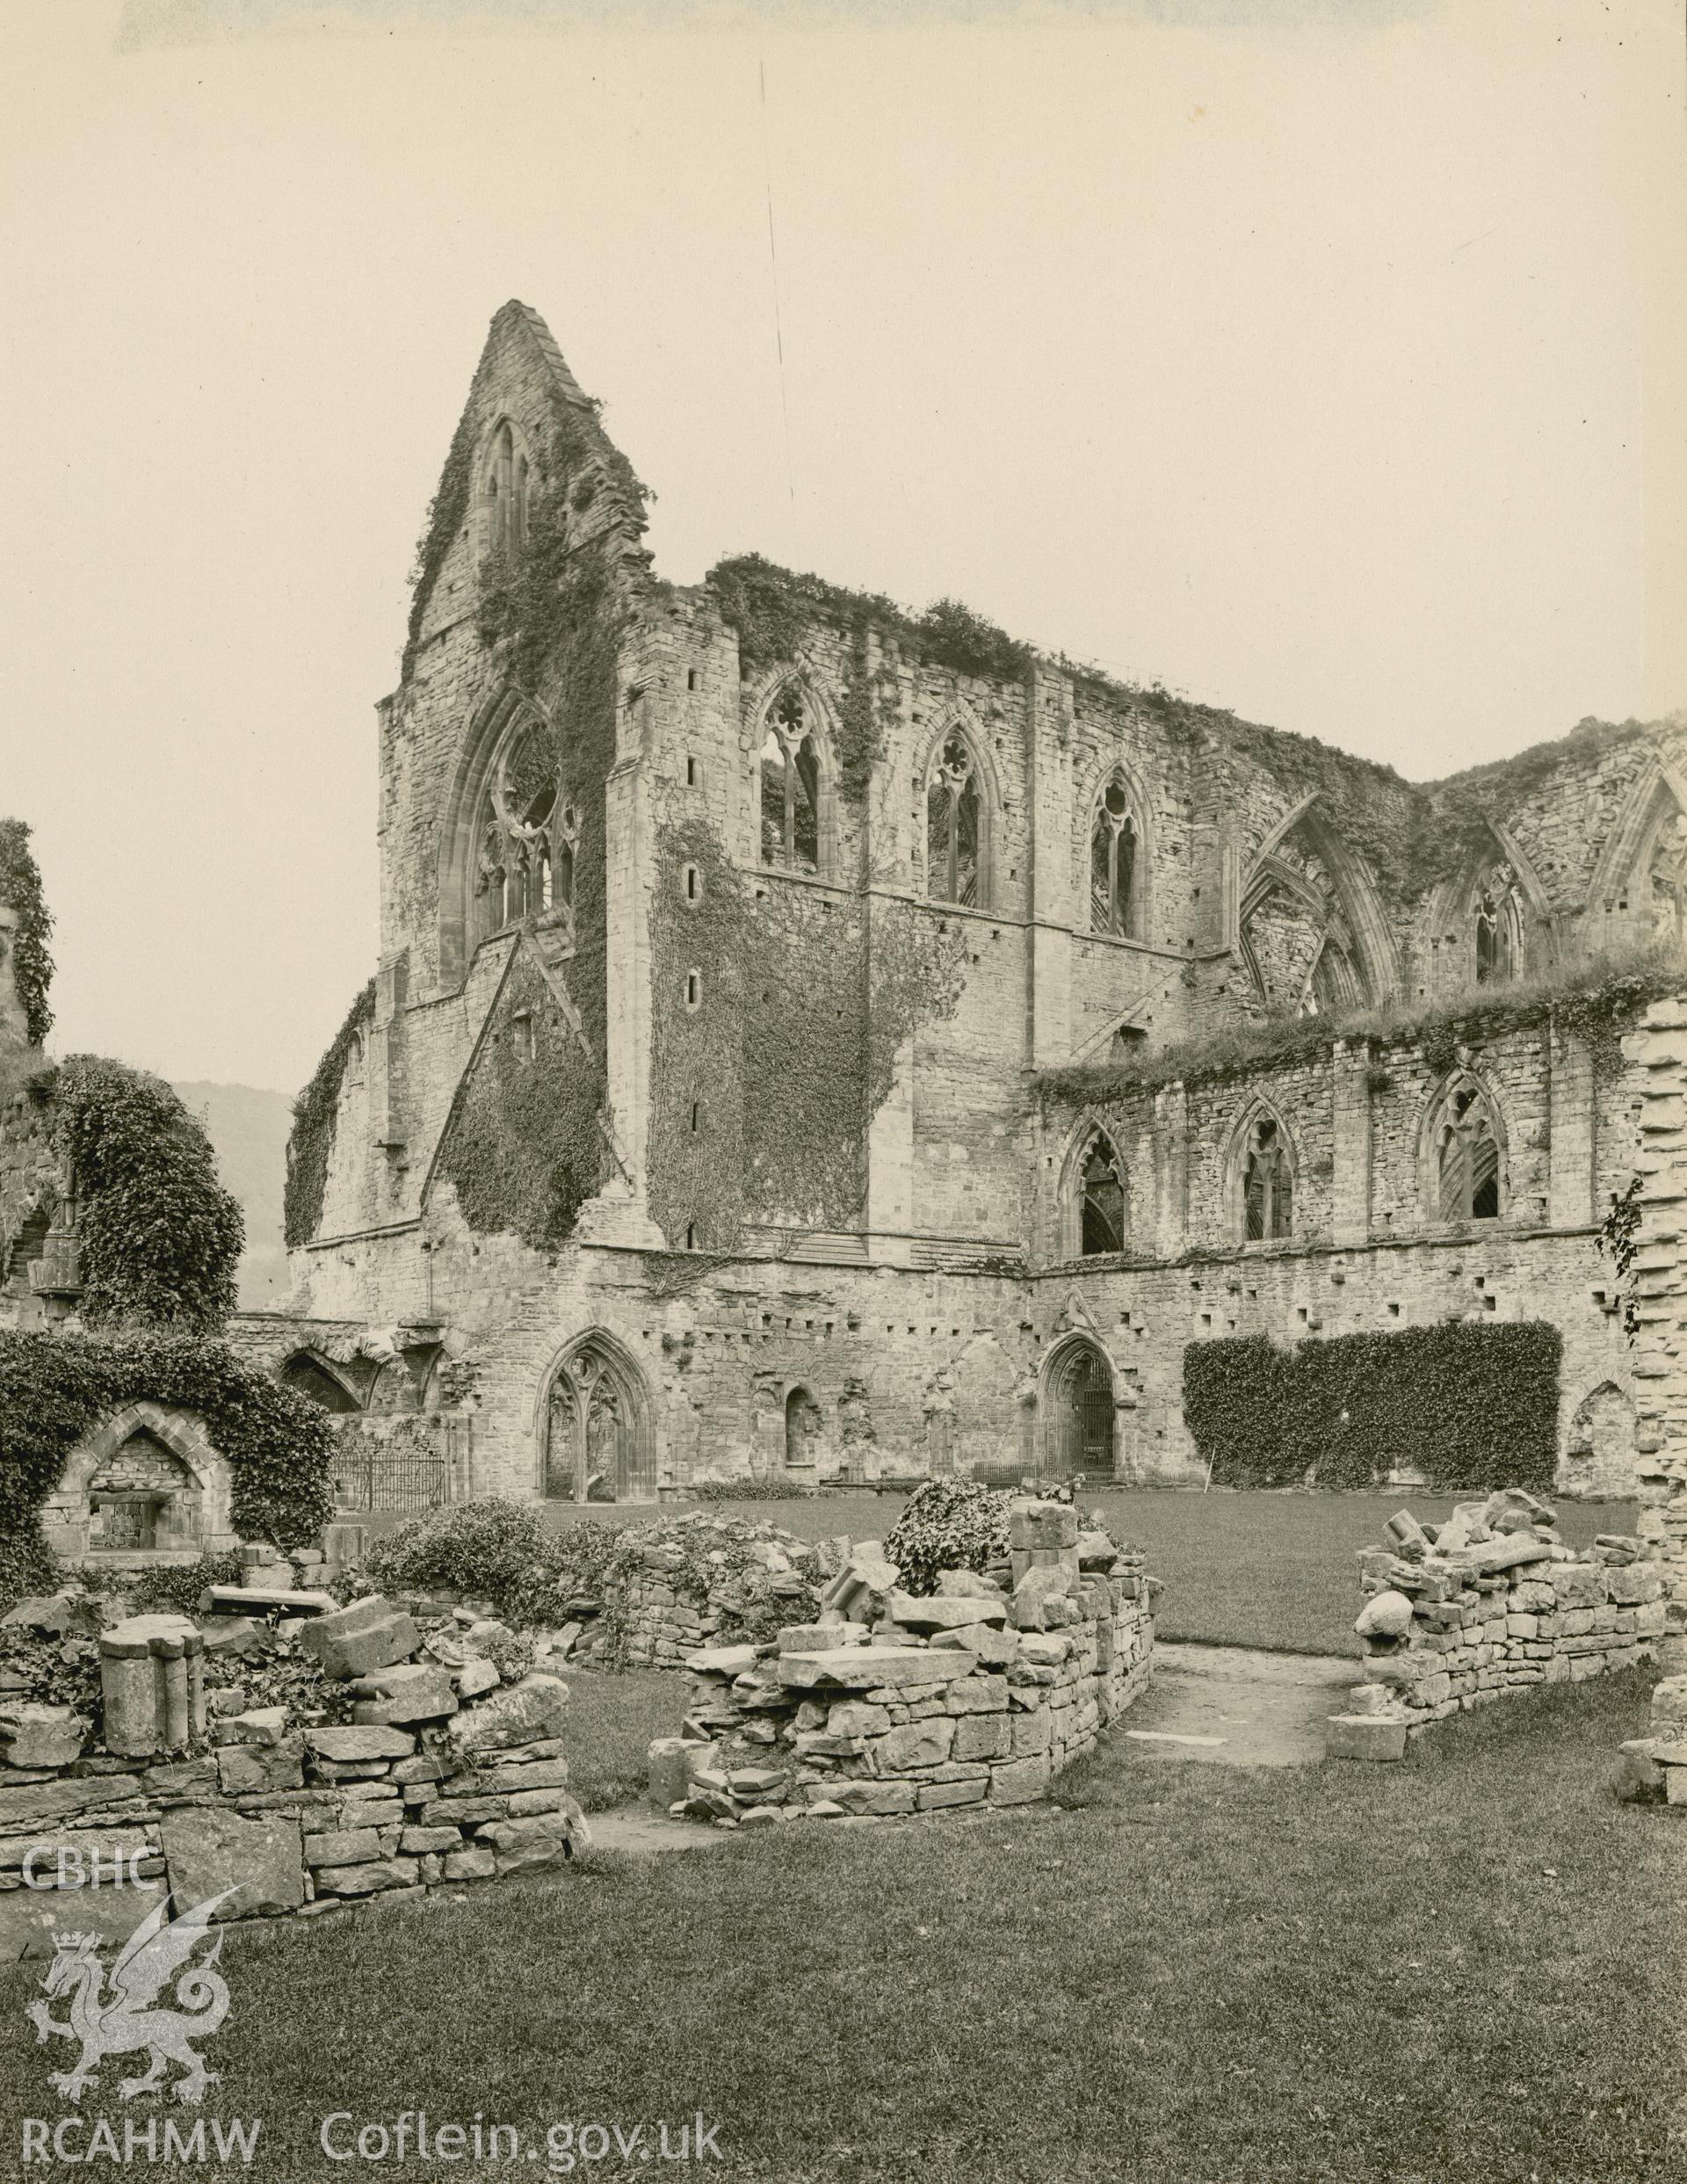 Digital copy of an early National Buildings Record photograph showing an exterior view of Tintern Abbey across the cloister looking southeast.